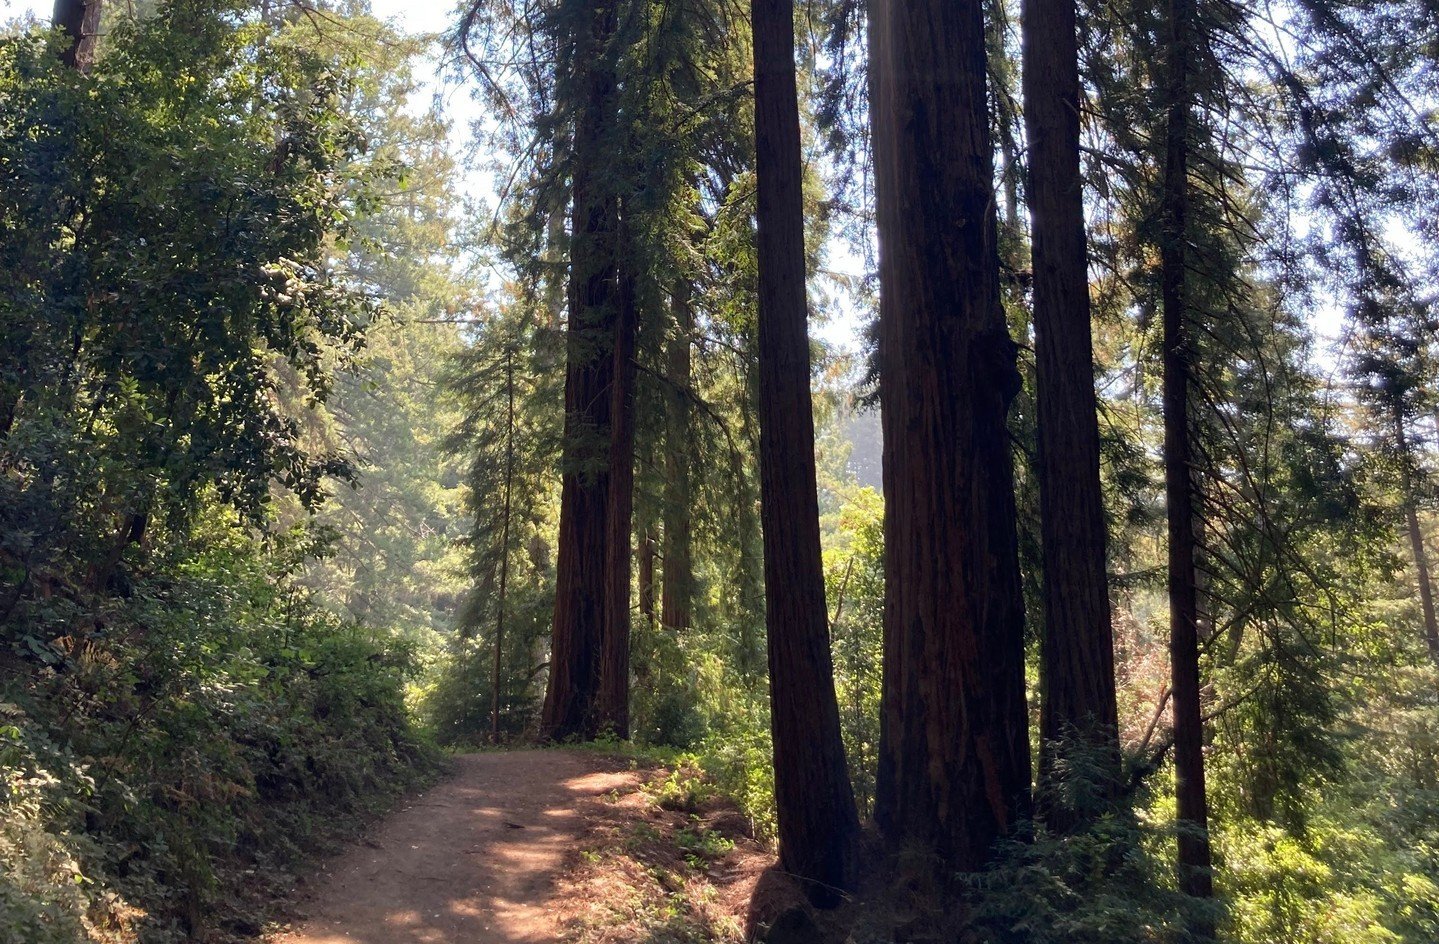 ***Heads up that we won't be having a Sunday service this week because most of us will be at our church-wide retreat at Alliance Redwoods!*** Please pray for us to have a restorative + fun time together.

For next Sunday, May 5th &ndash; New Traditio